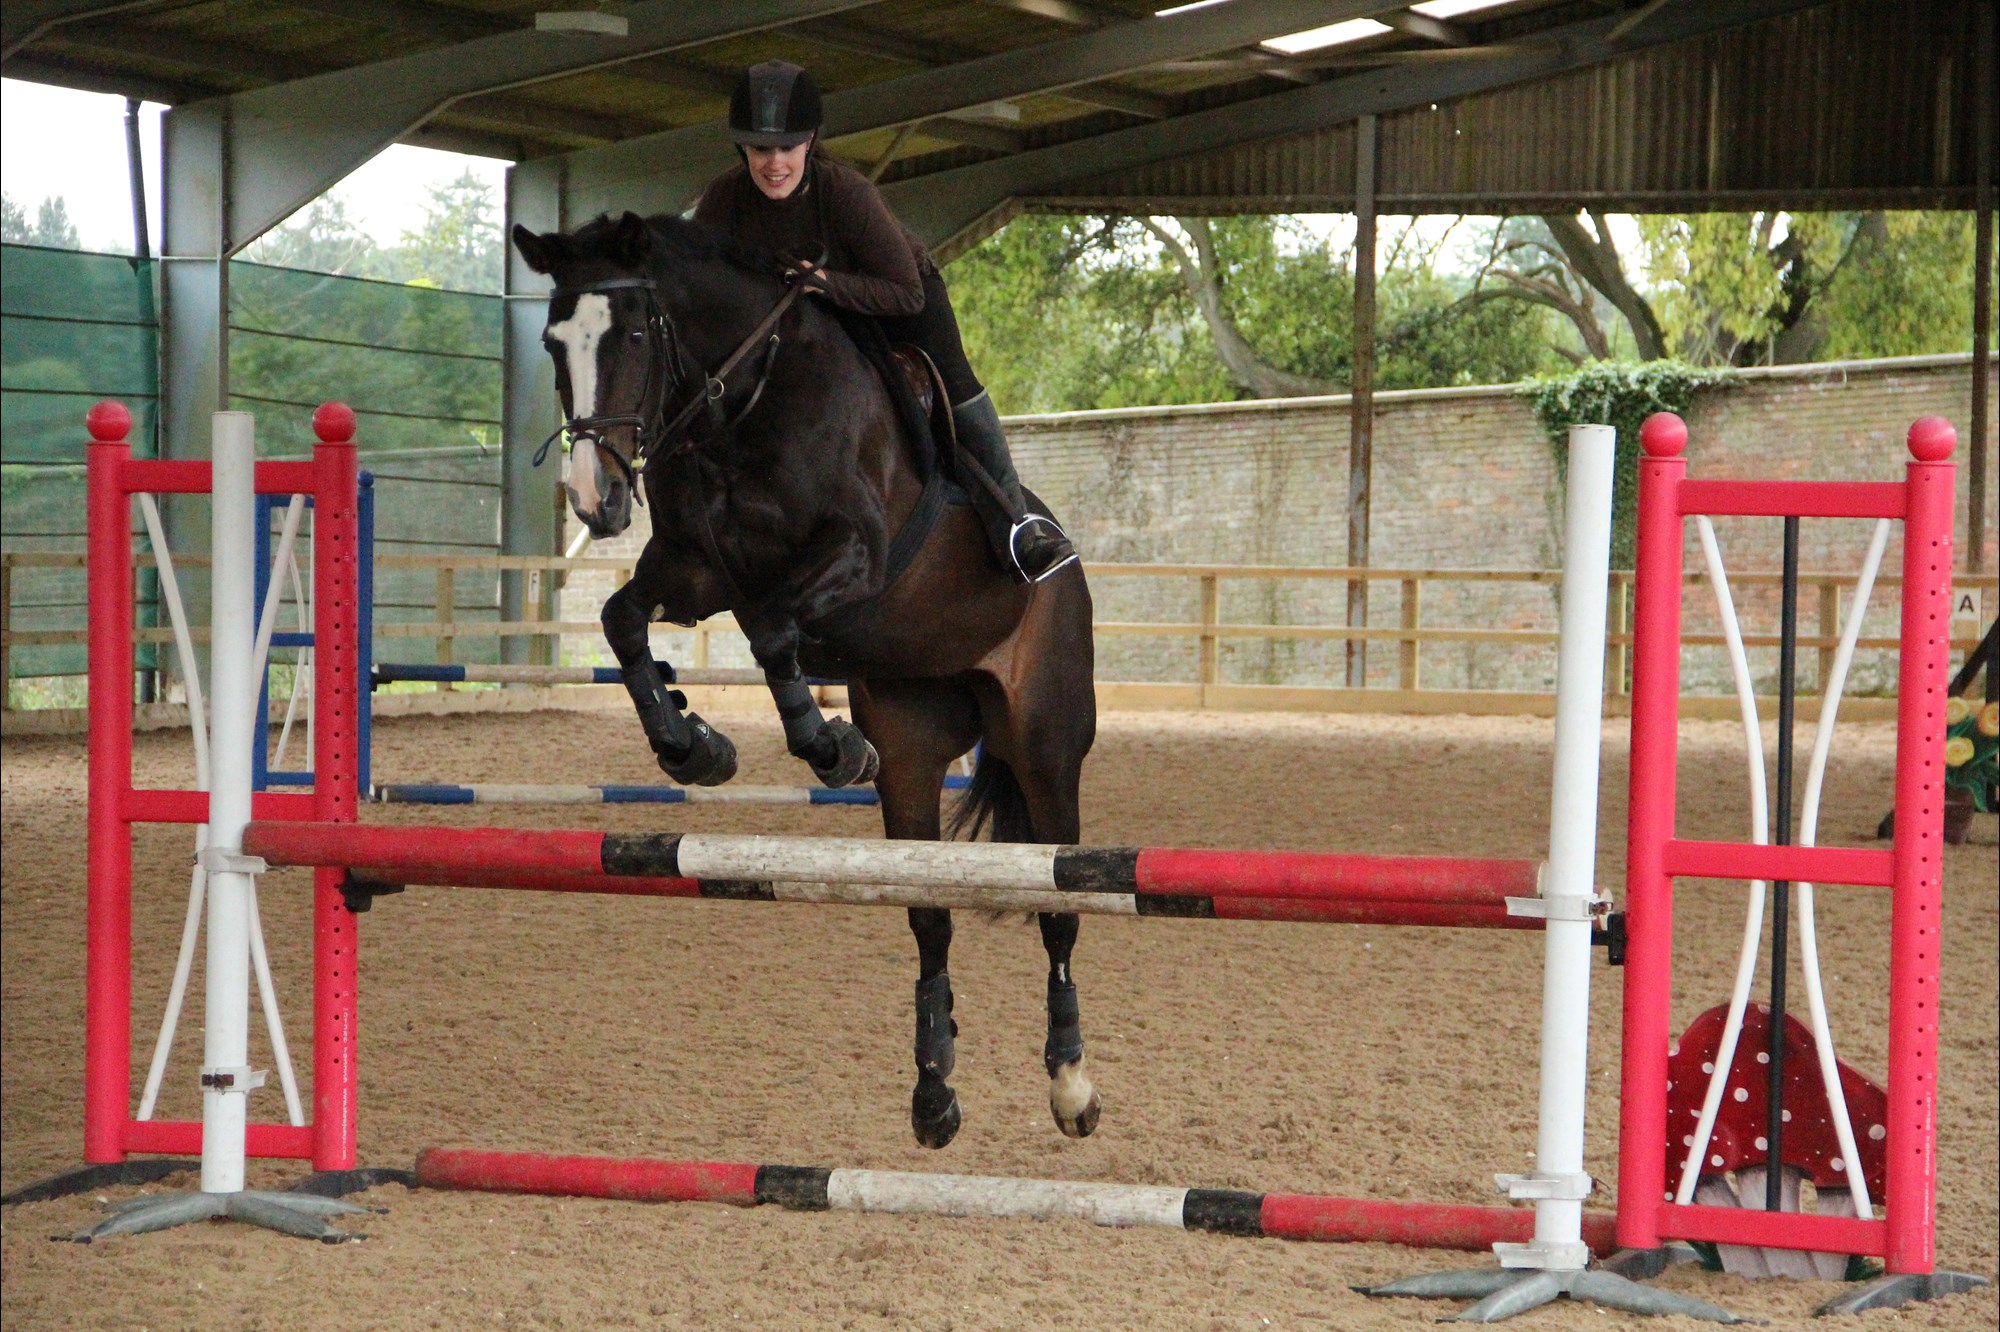 Alex and Summer jumping over a fence in an arena